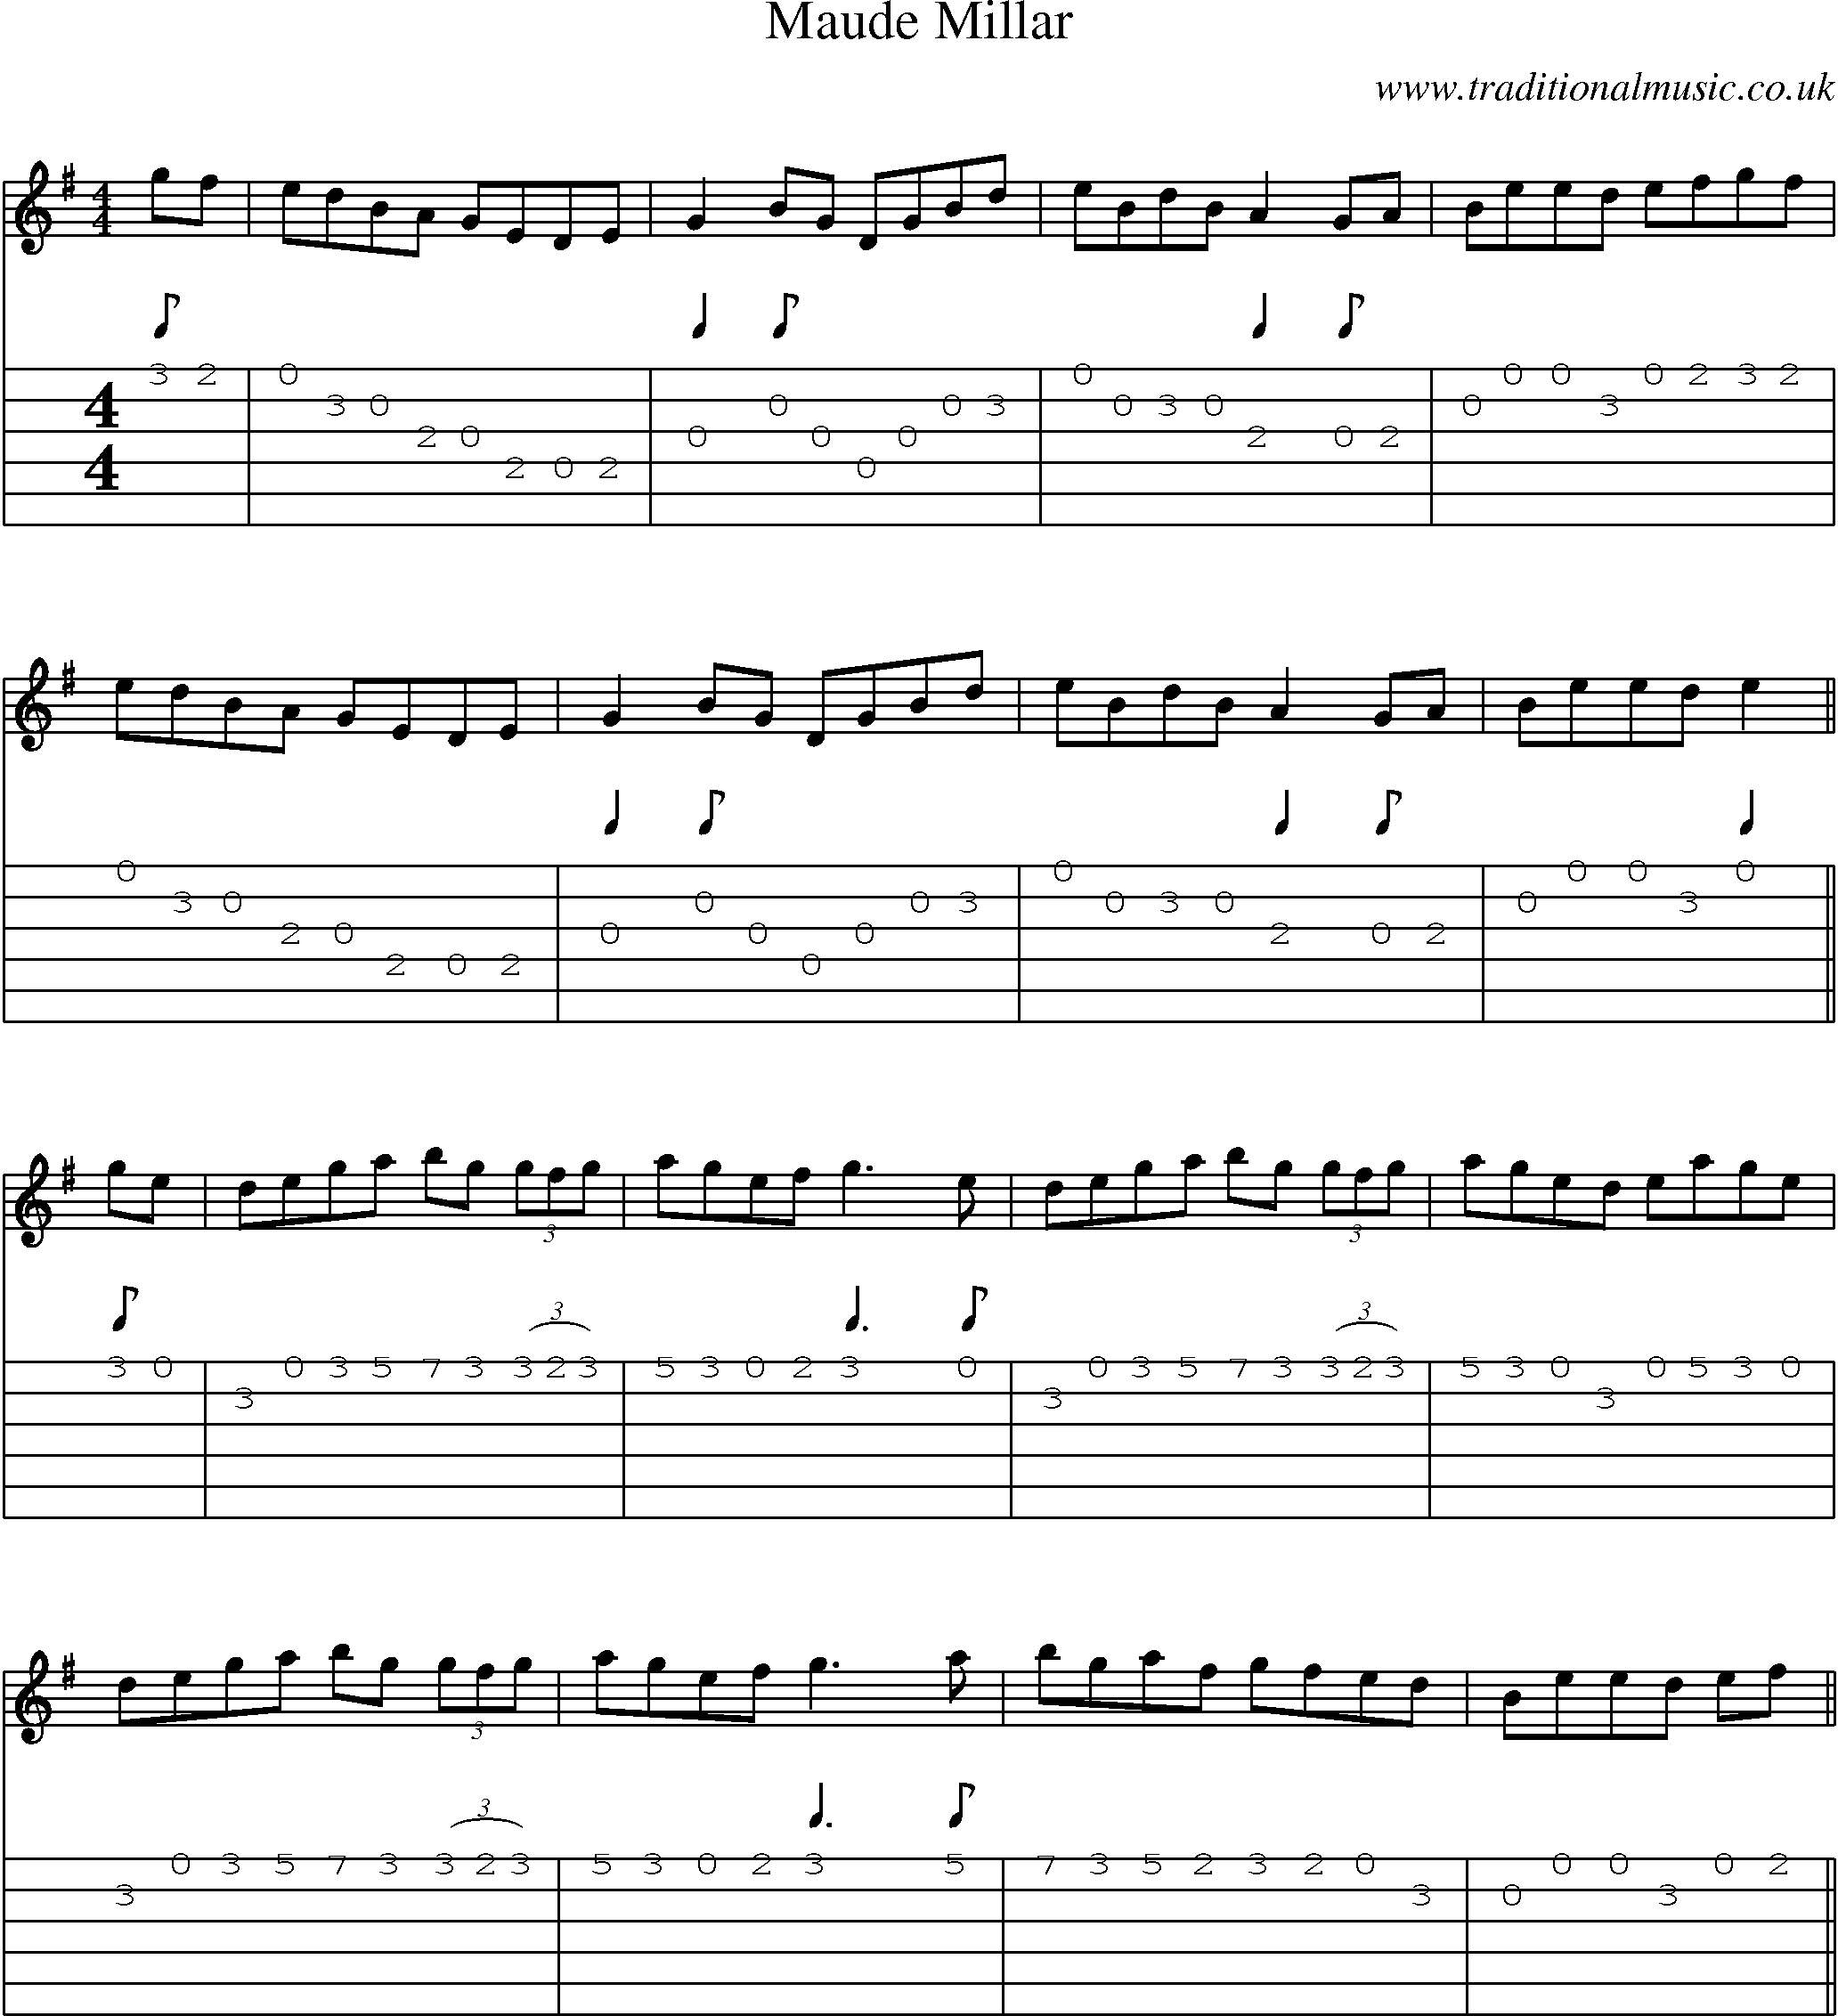 Music Score and Guitar Tabs for Maude Millar